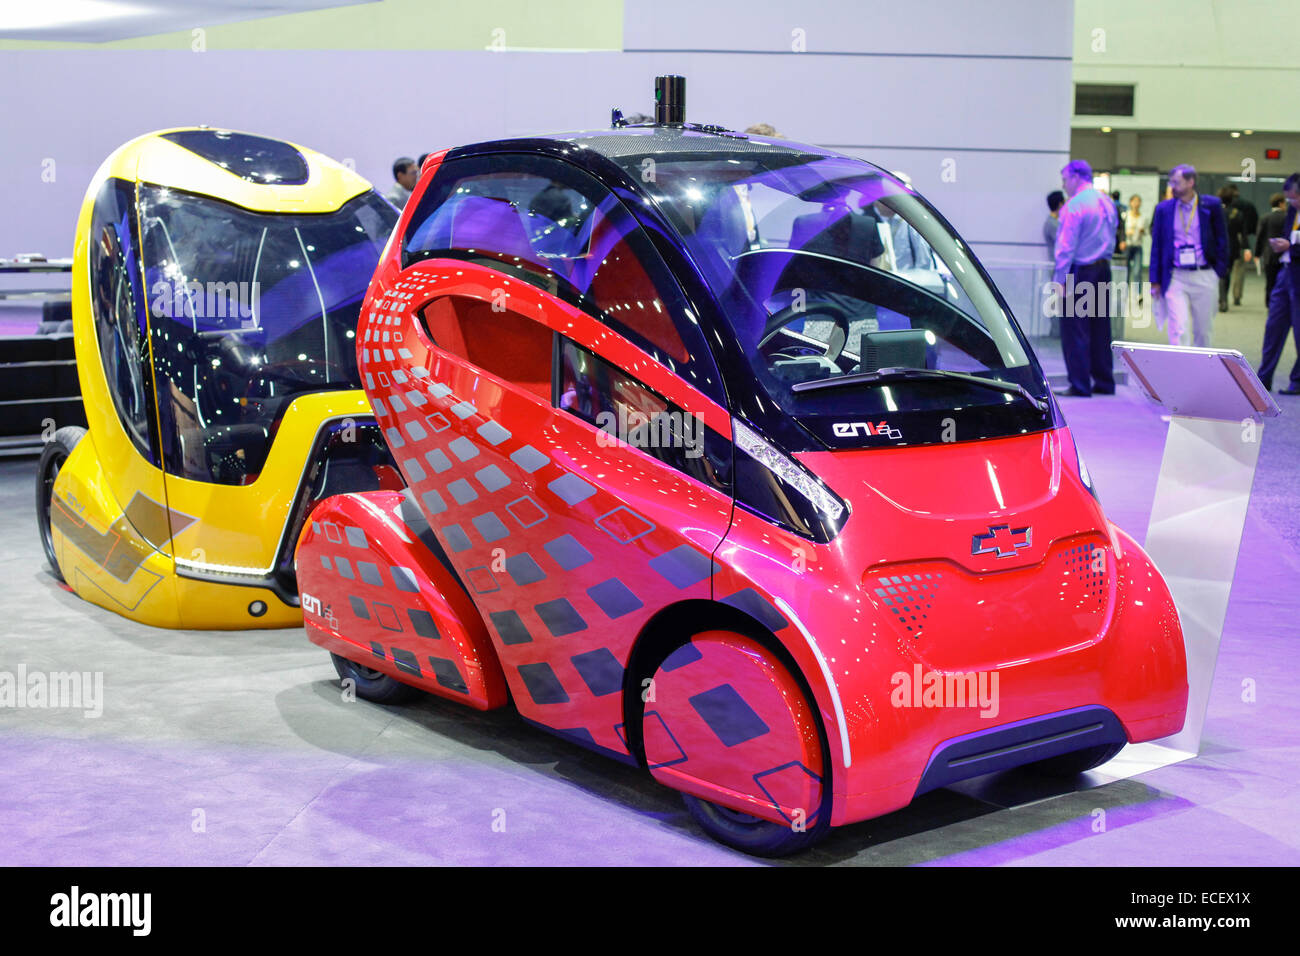 Detroit, Michigan -  The Chevrolet EN-V 2.0 Concept Vehicle (front) on display at the Intelligent Transport Systems World Congre Stock Photo